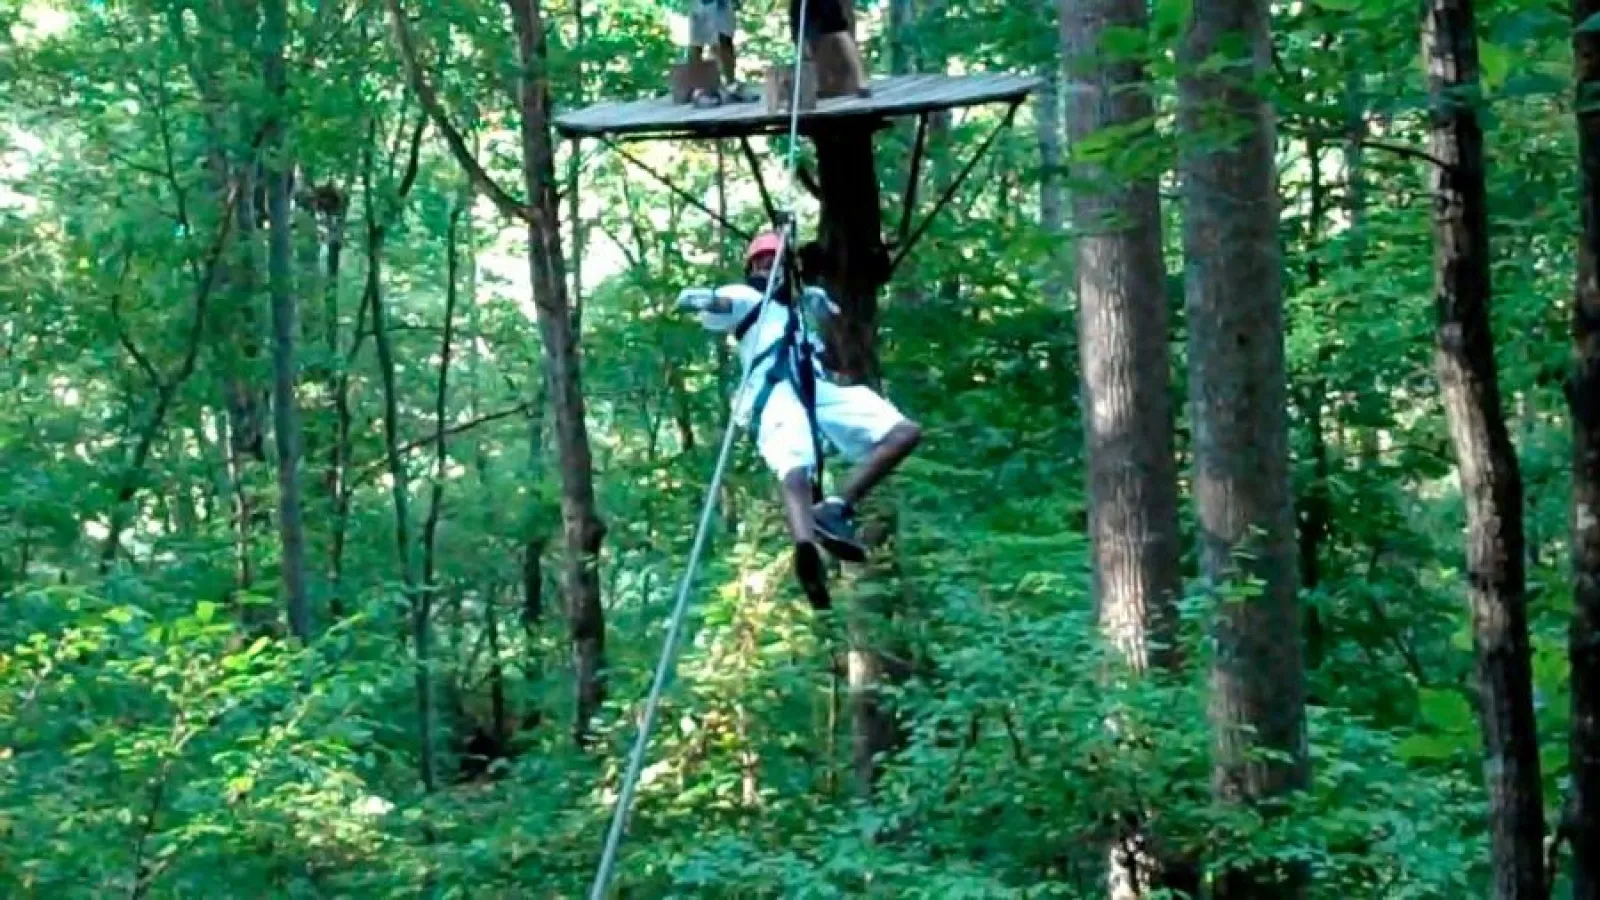 a person on a zip-line in the forest